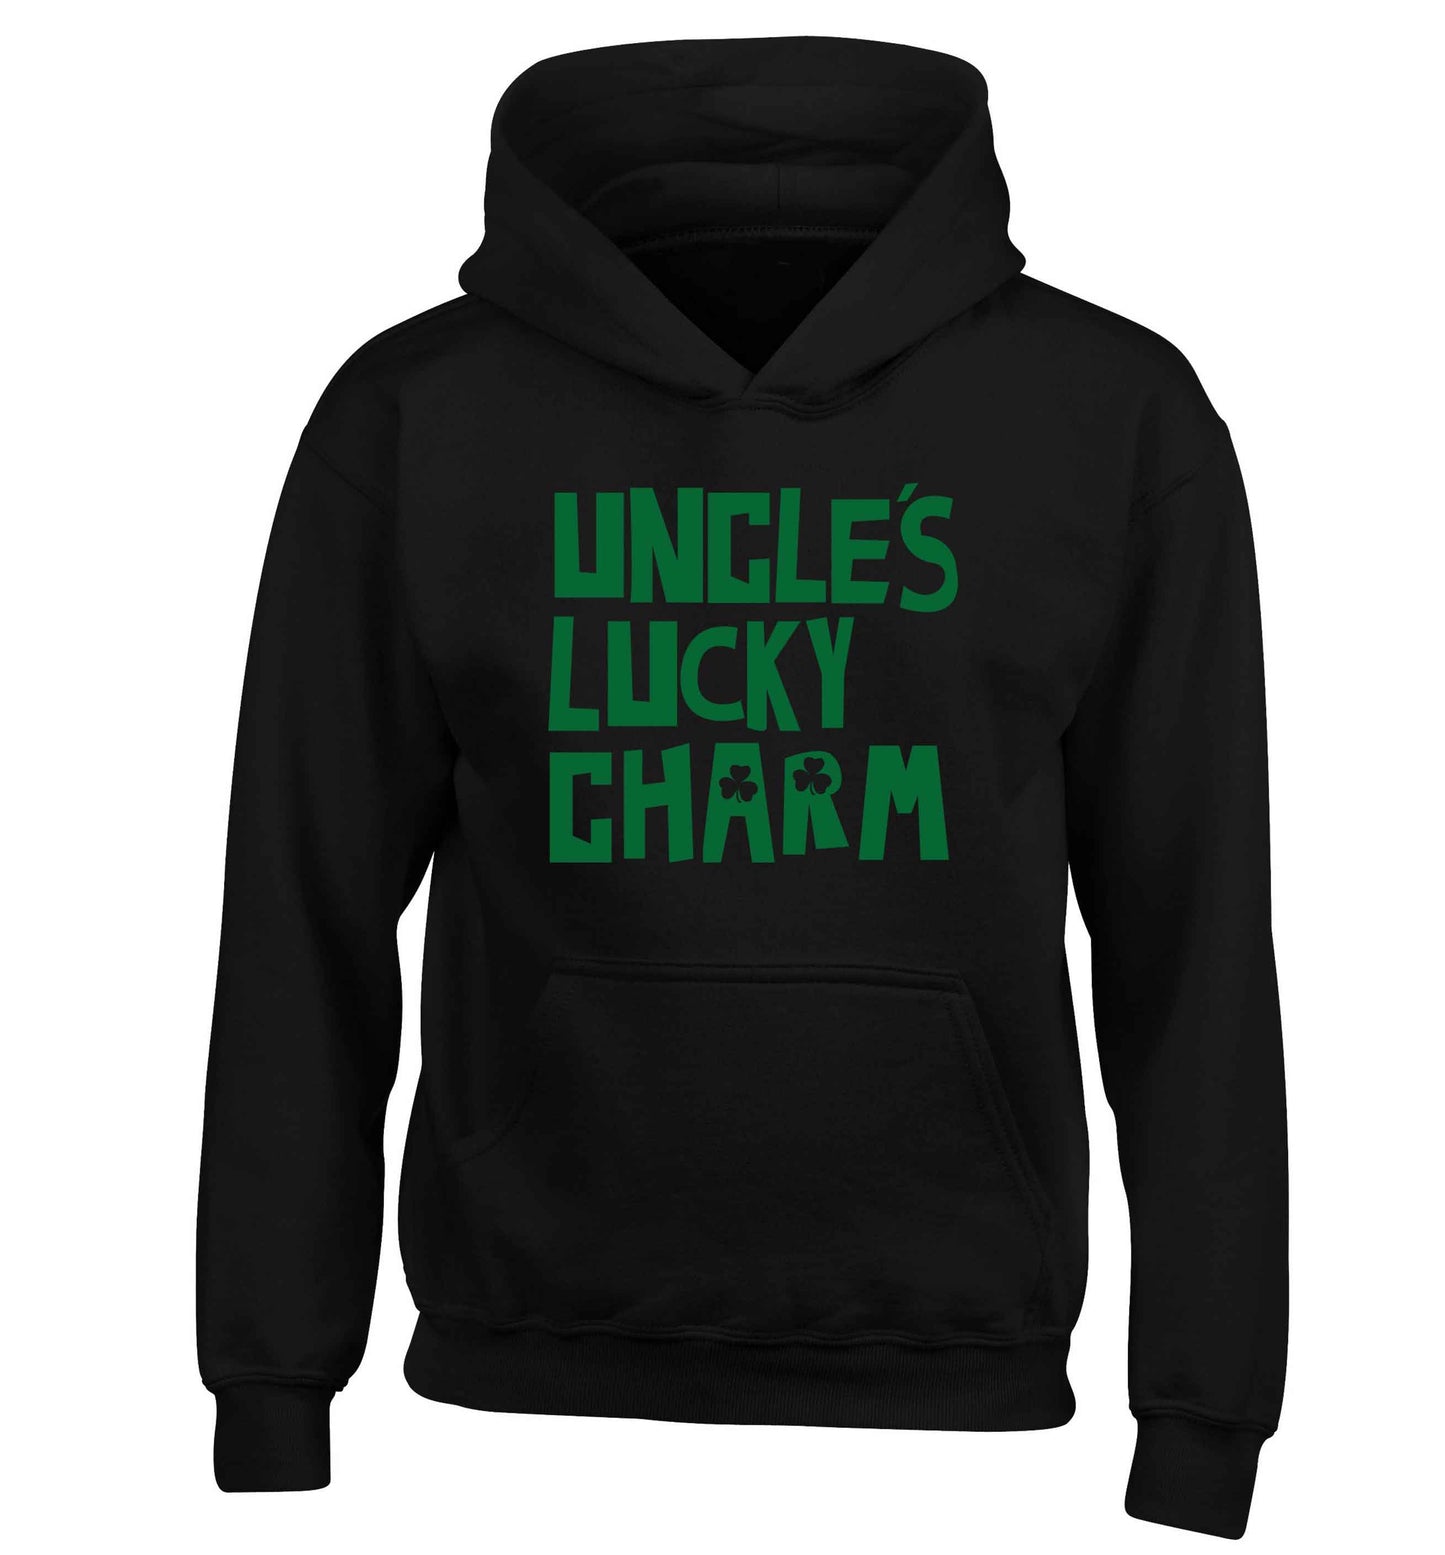 Uncles lucky charm children's black hoodie 12-13 Years